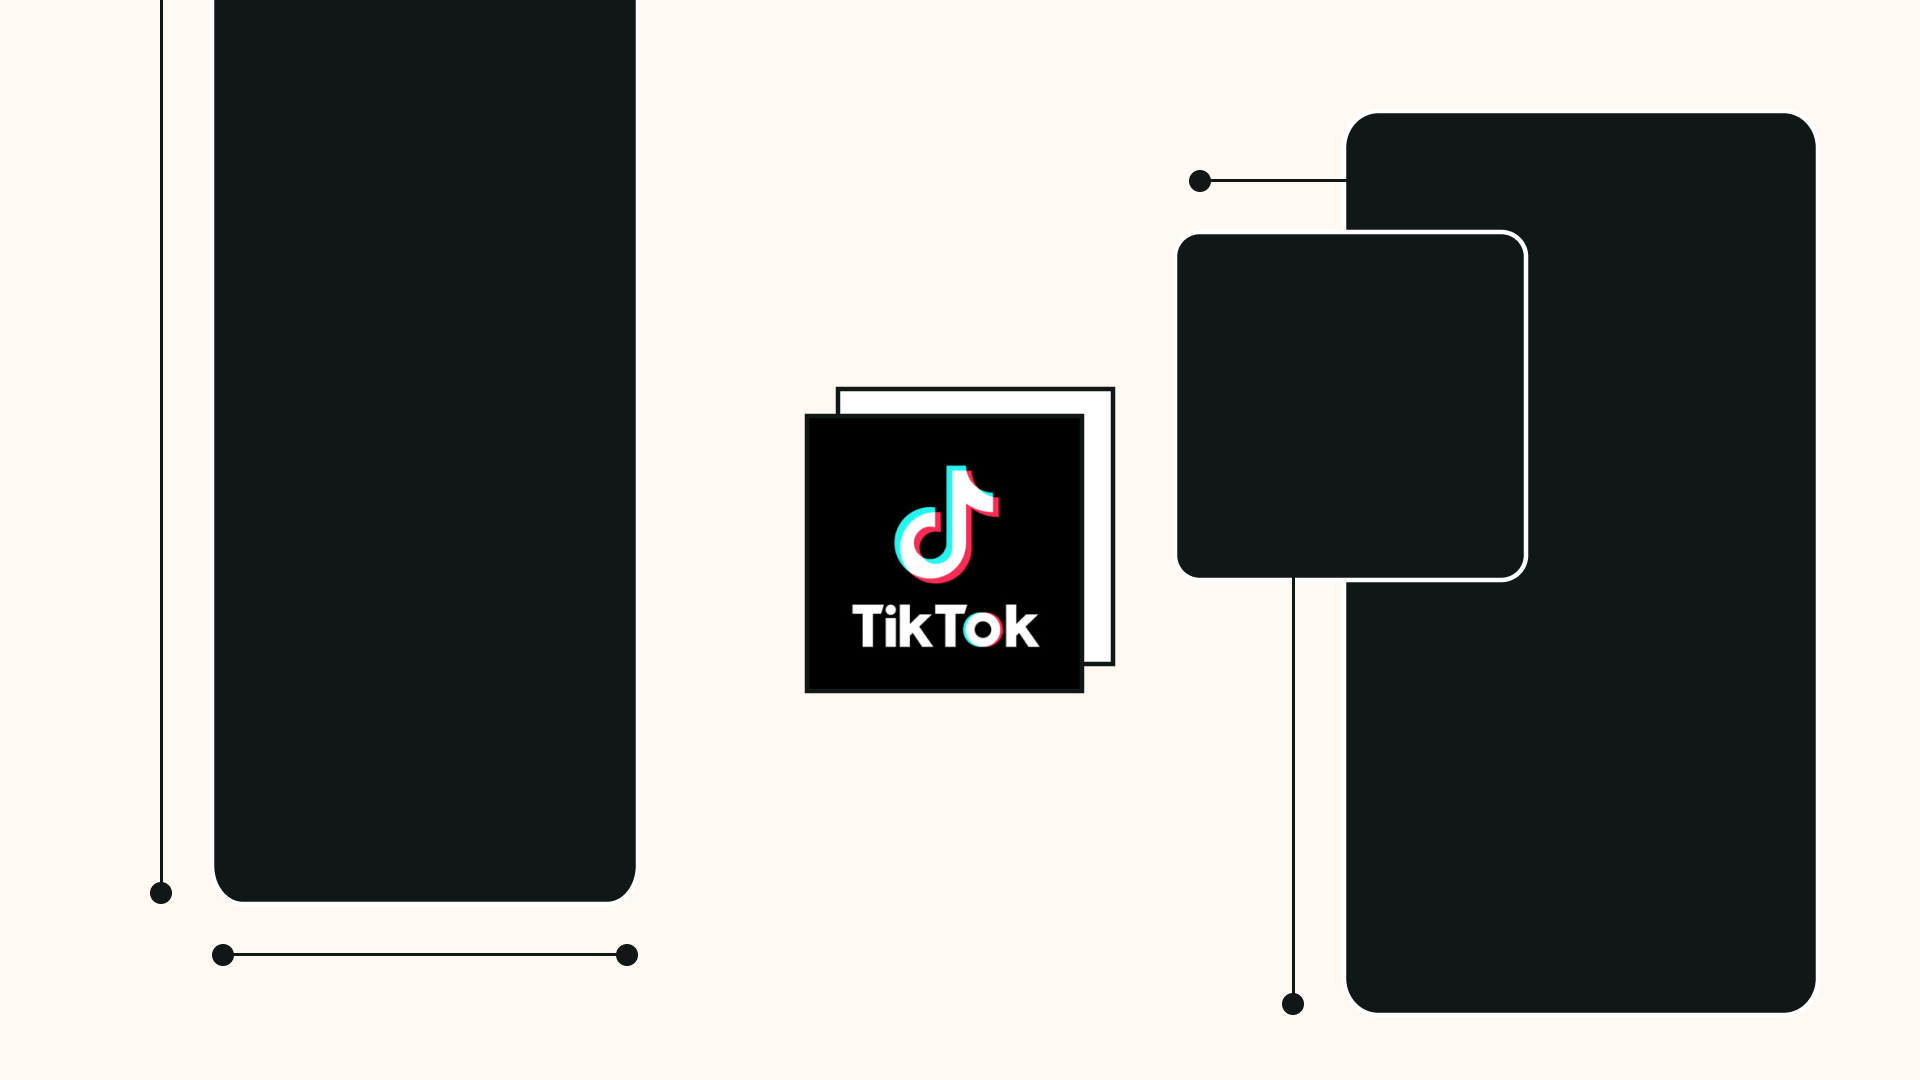 Ideal TikTok video length and size in 2023 - The Ultimate Guide